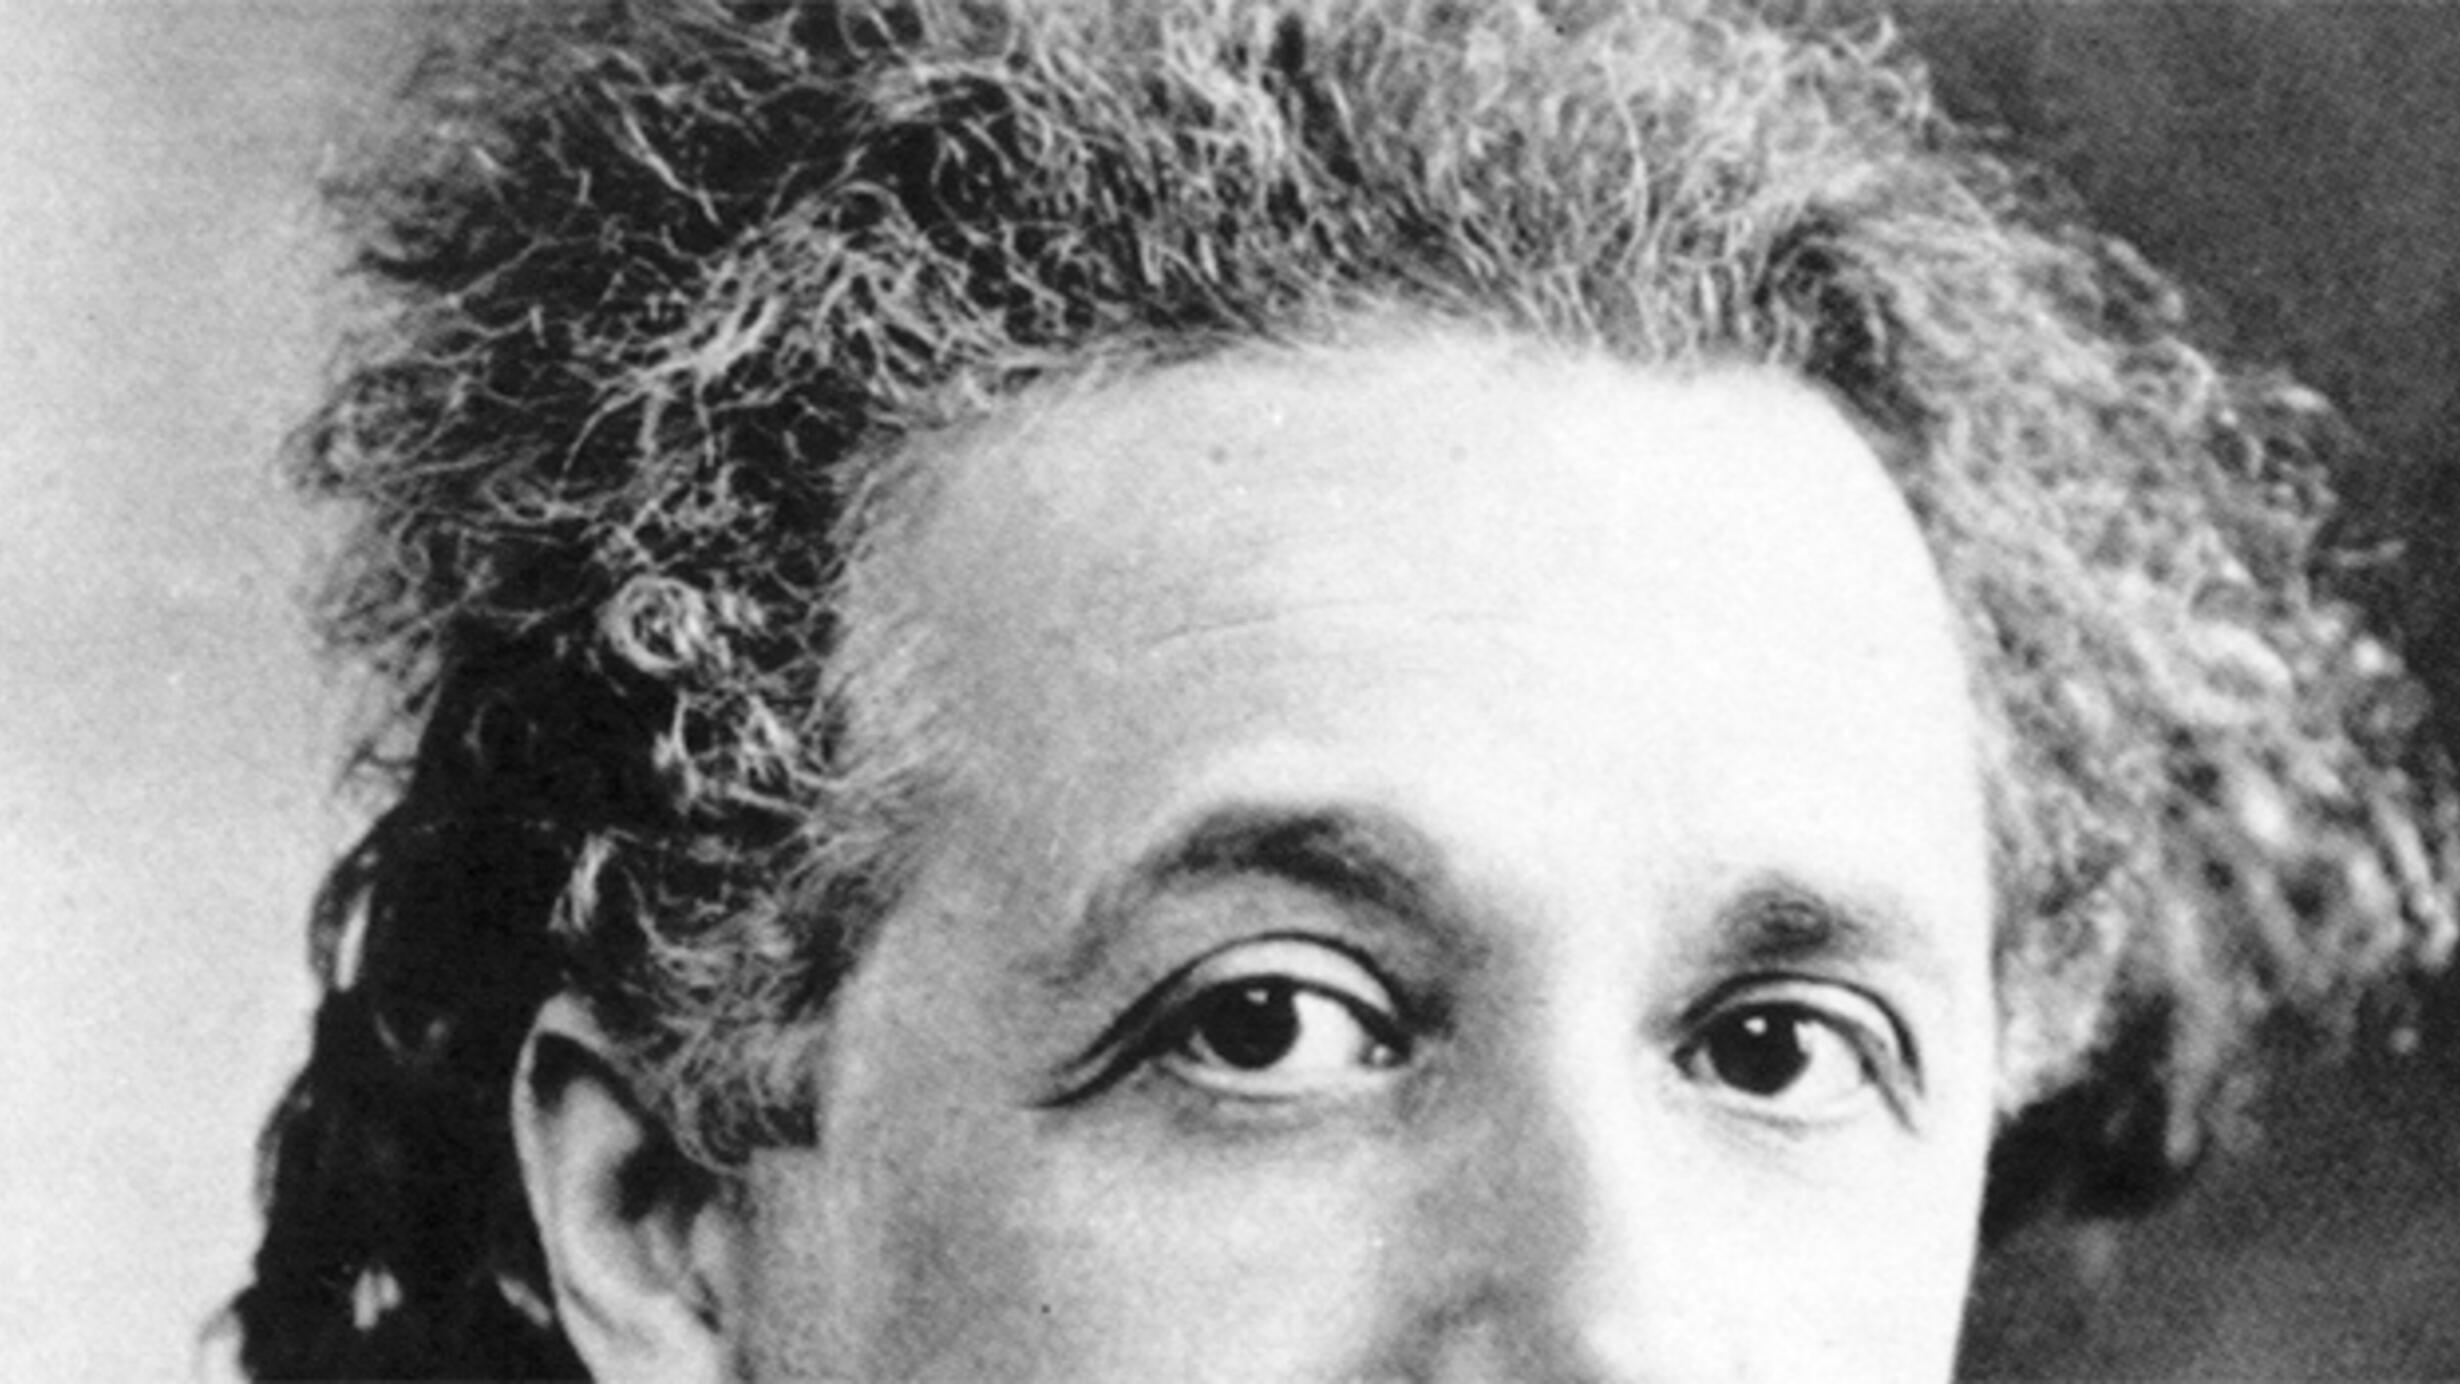 A greyscale photograph of Albert Einstein, cropped to only show his eyes, forehead, and his iconic wild hair.